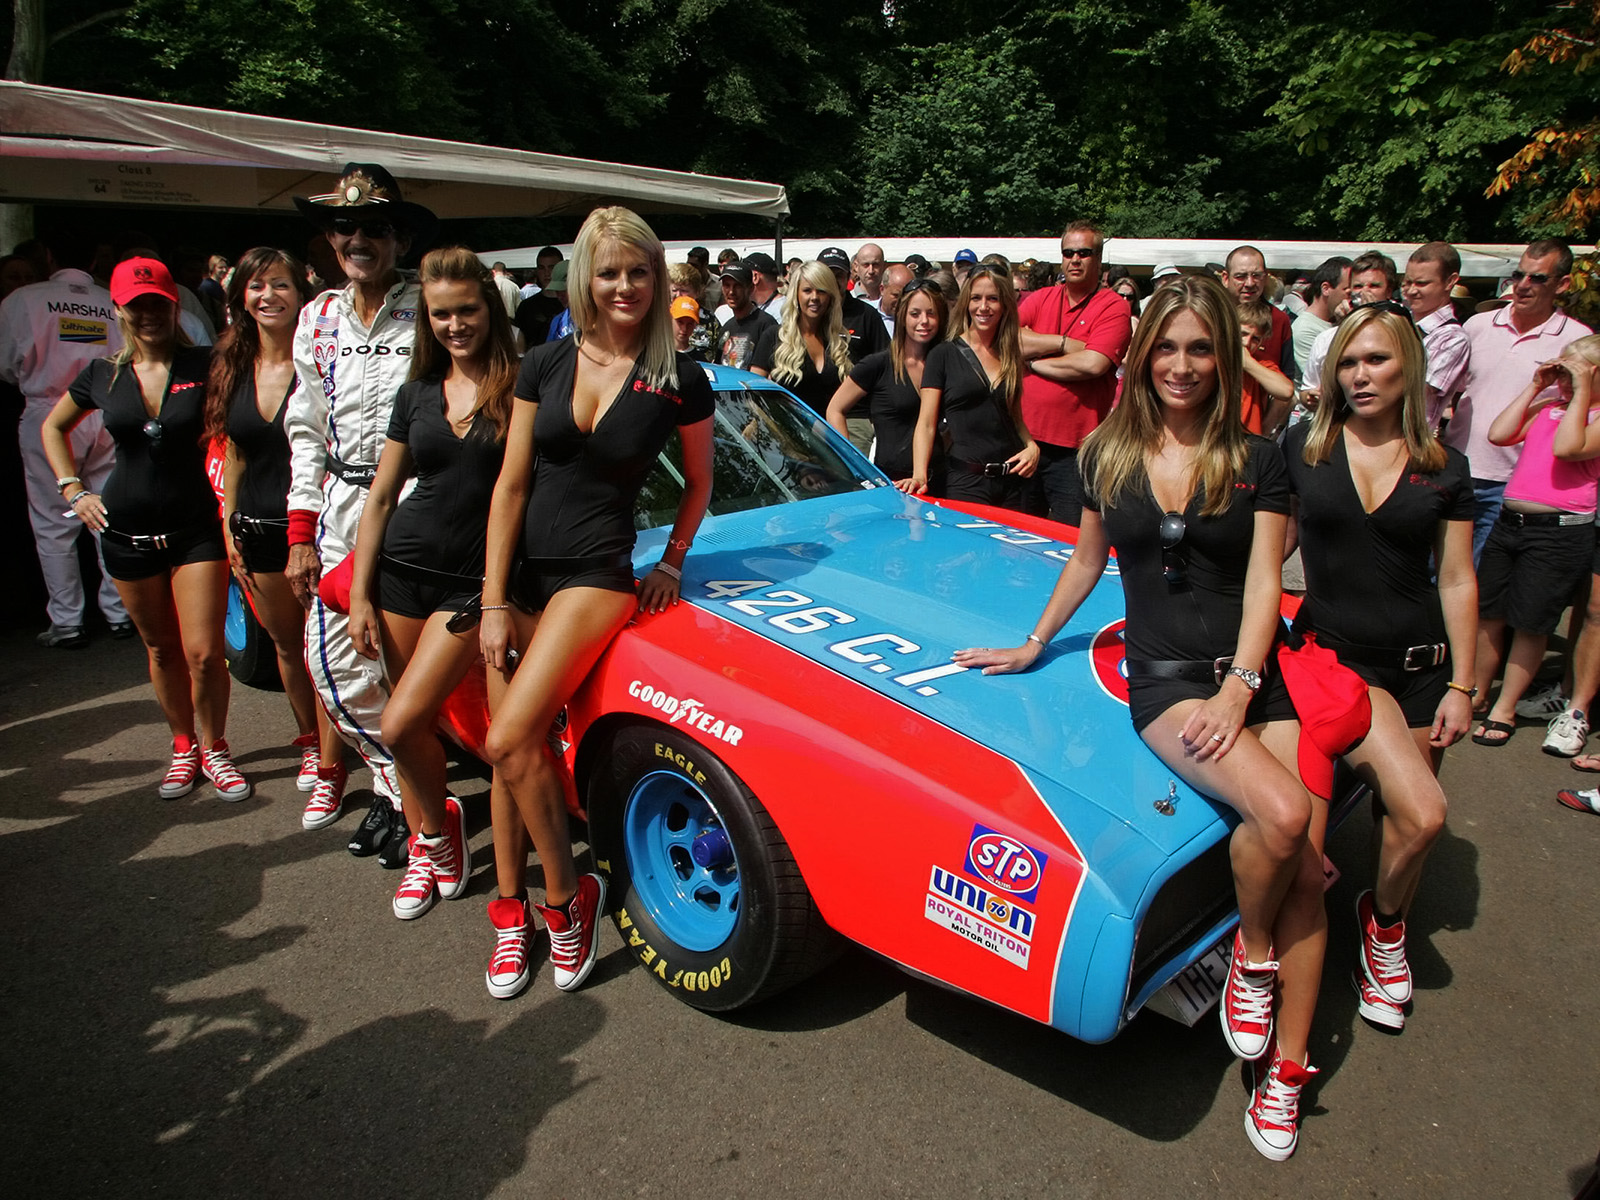 1972 Dodge Charger NASCAR Race Car - Girls And The Car - 1600x1200 -